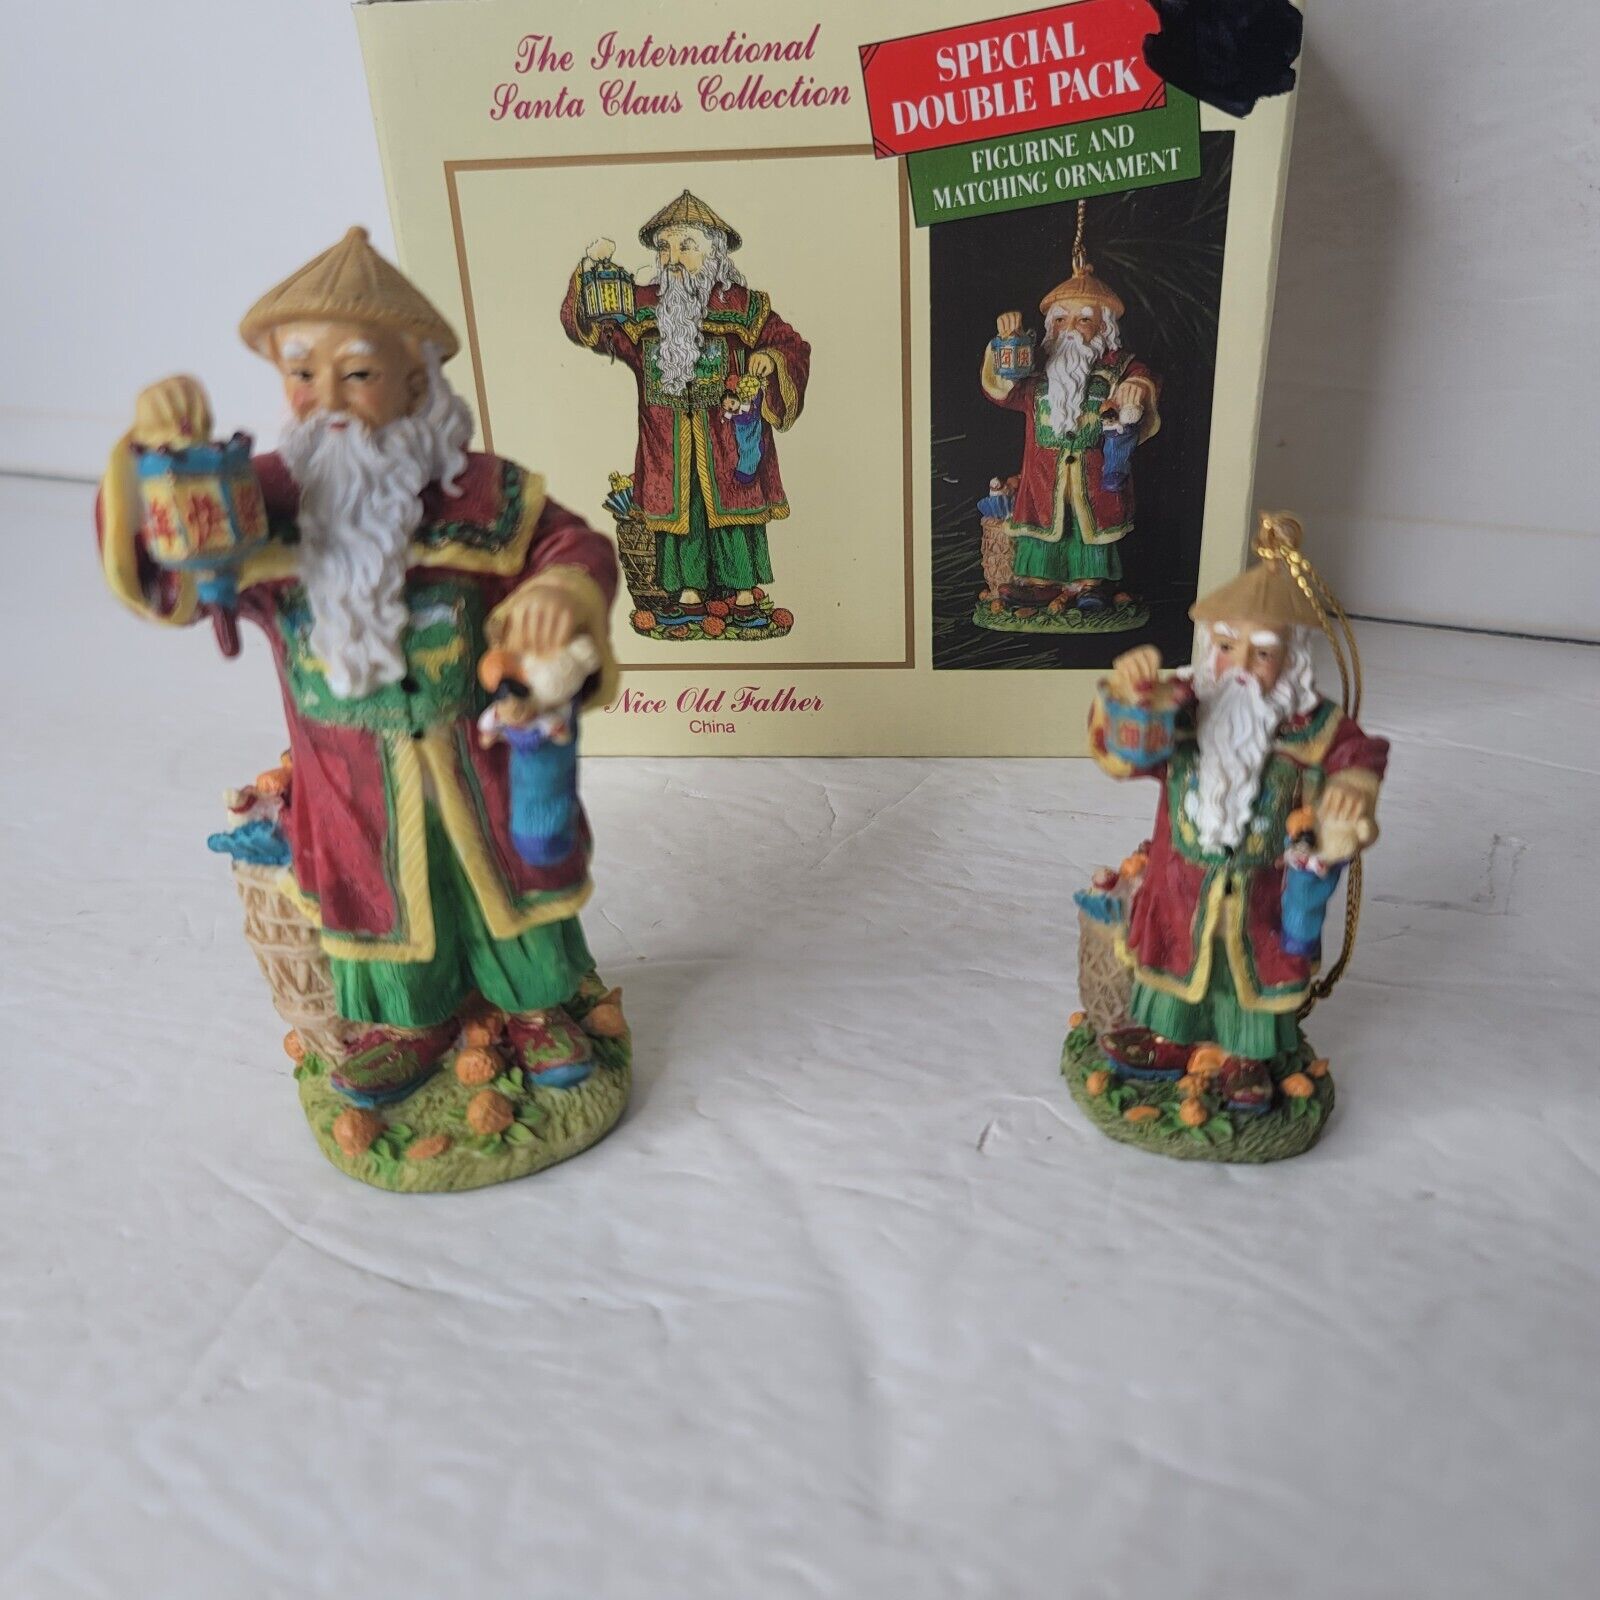 Nice Old Father China International Santa Claus Collection Figurine Ornament 96